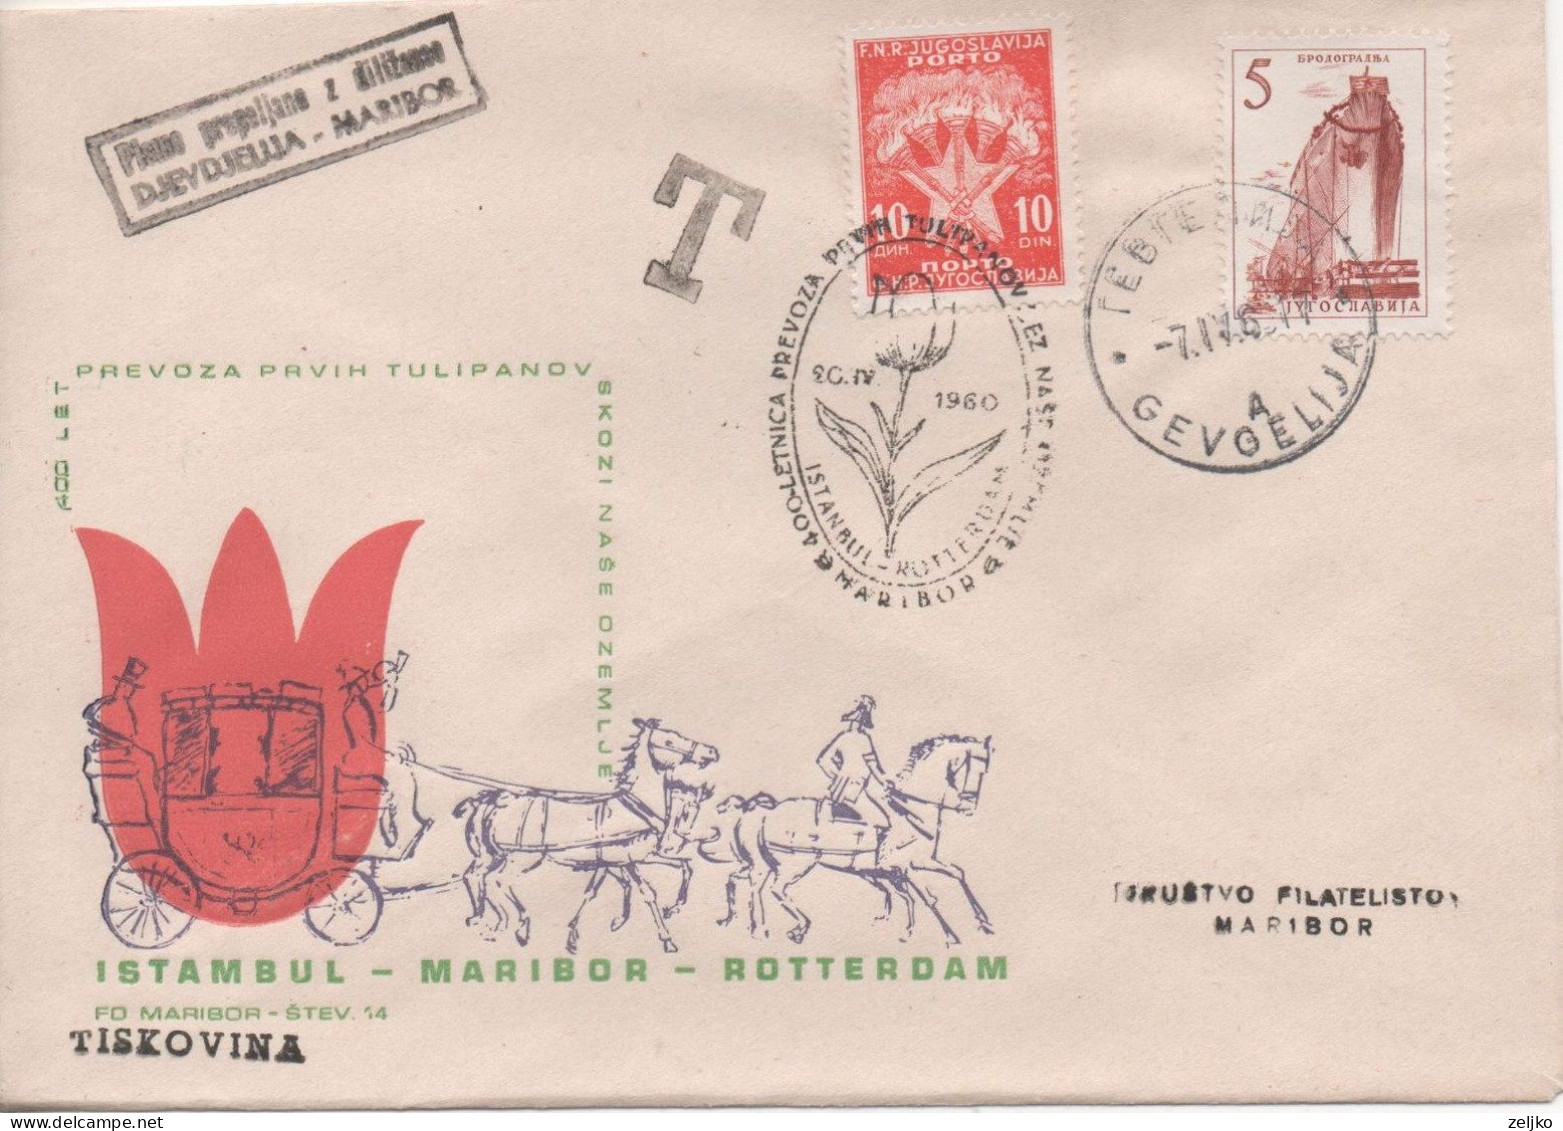 Yugoslavia, 400th Anniversary Of The Transport Of The First Tulips On The Route Rotterdam-Maribor - Istanbul, FD Maribor - Storia Postale